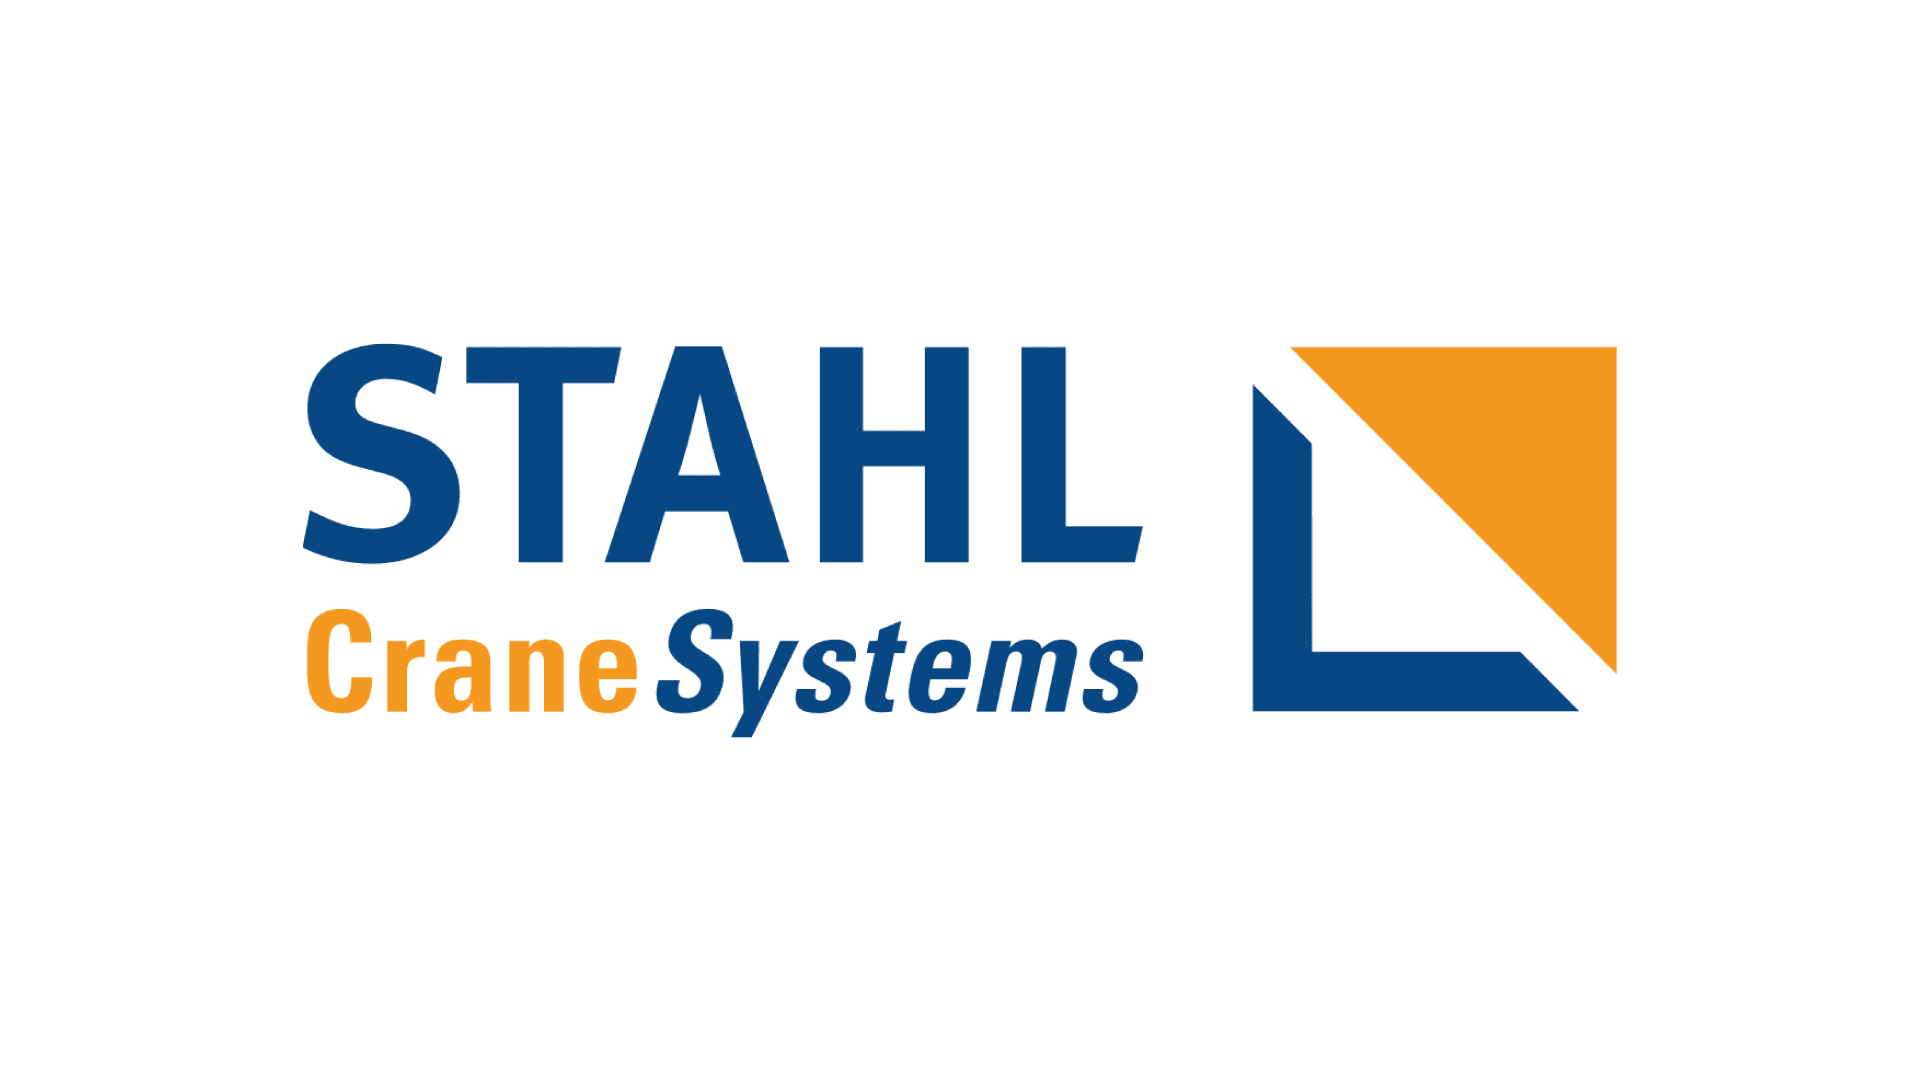 Stahl Crane Systems works with CADS